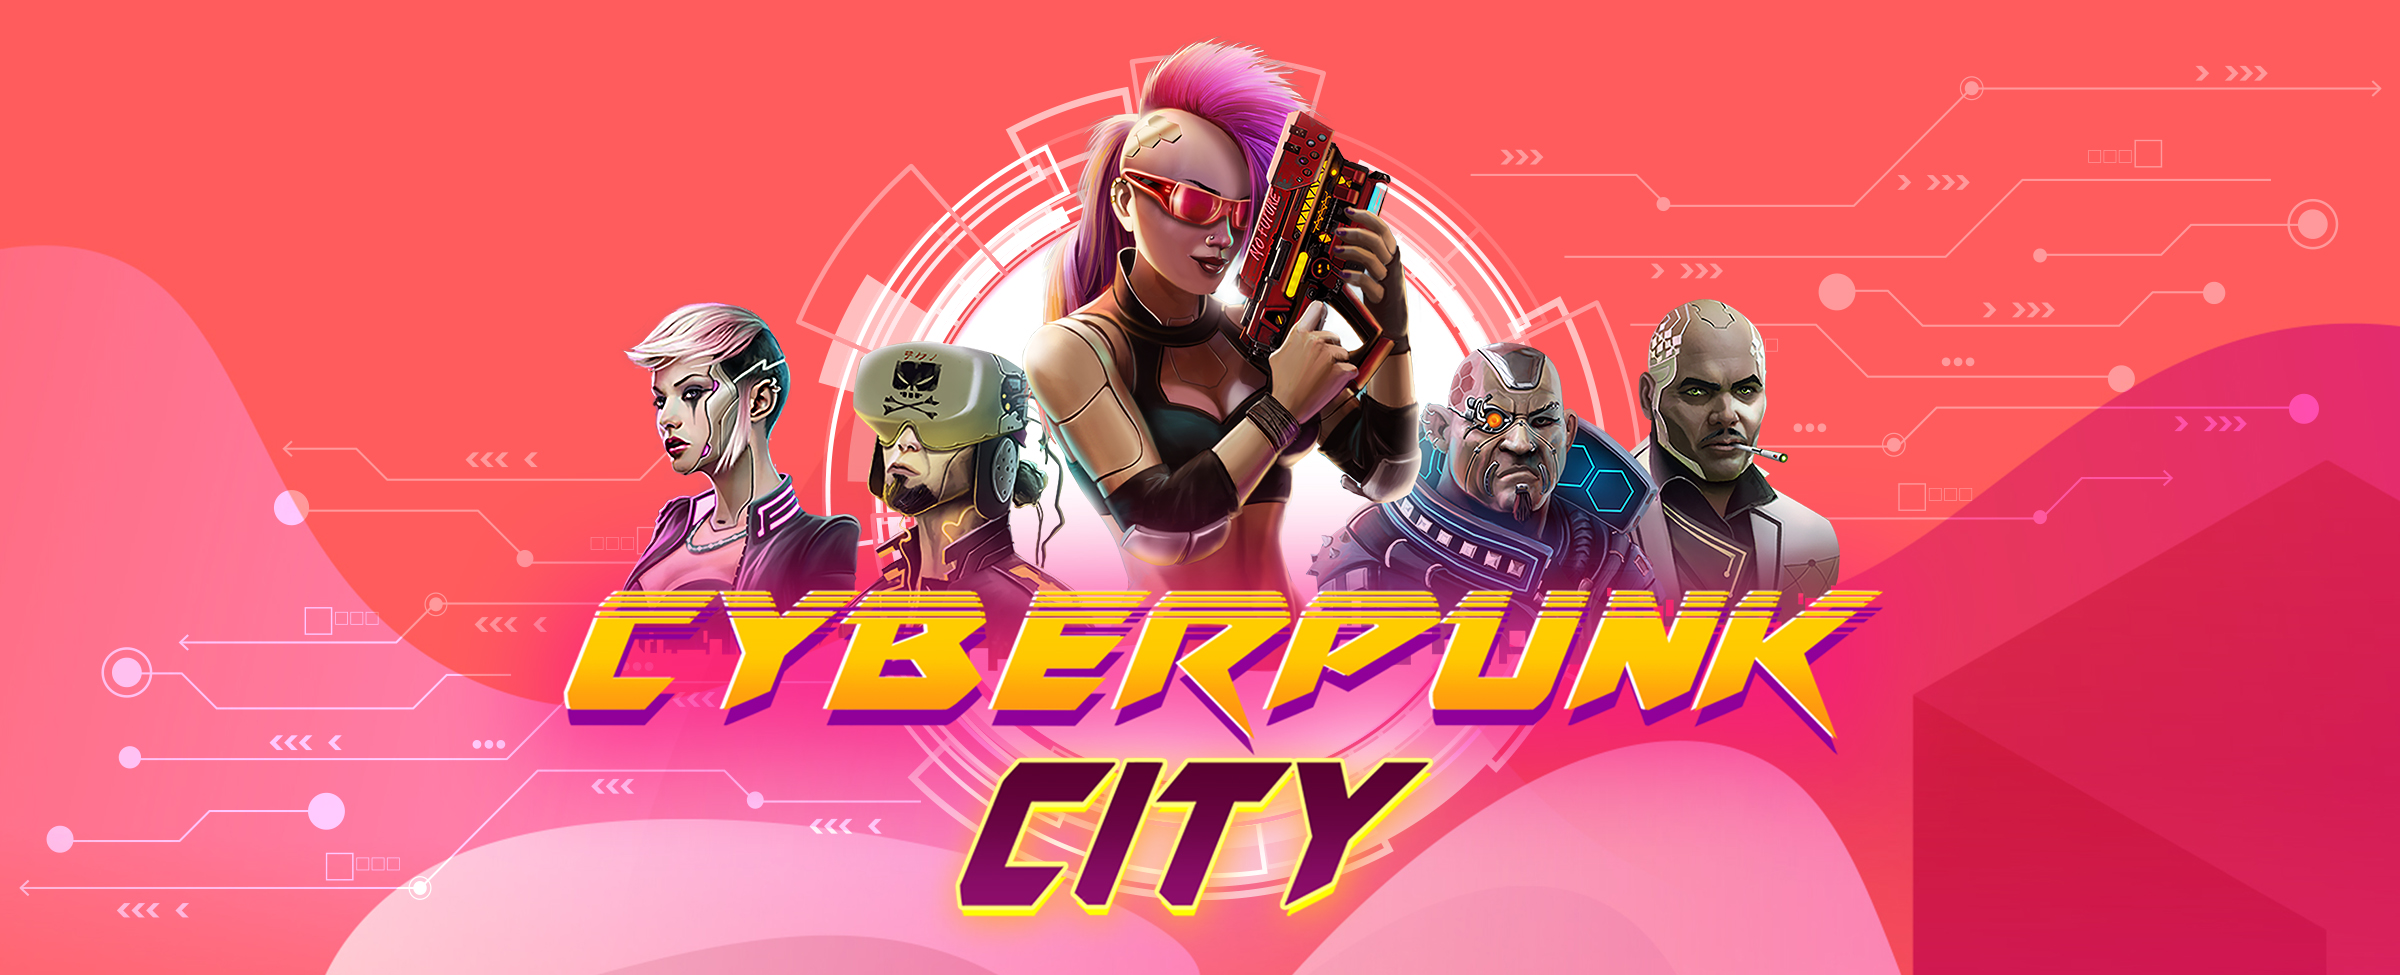 Five 3D-animated android-looking characters from the SlotsLV slot game “Cyberpunk City” appear in the center screen, with large overlaid font that also reads “Cyberpunk City” written below.